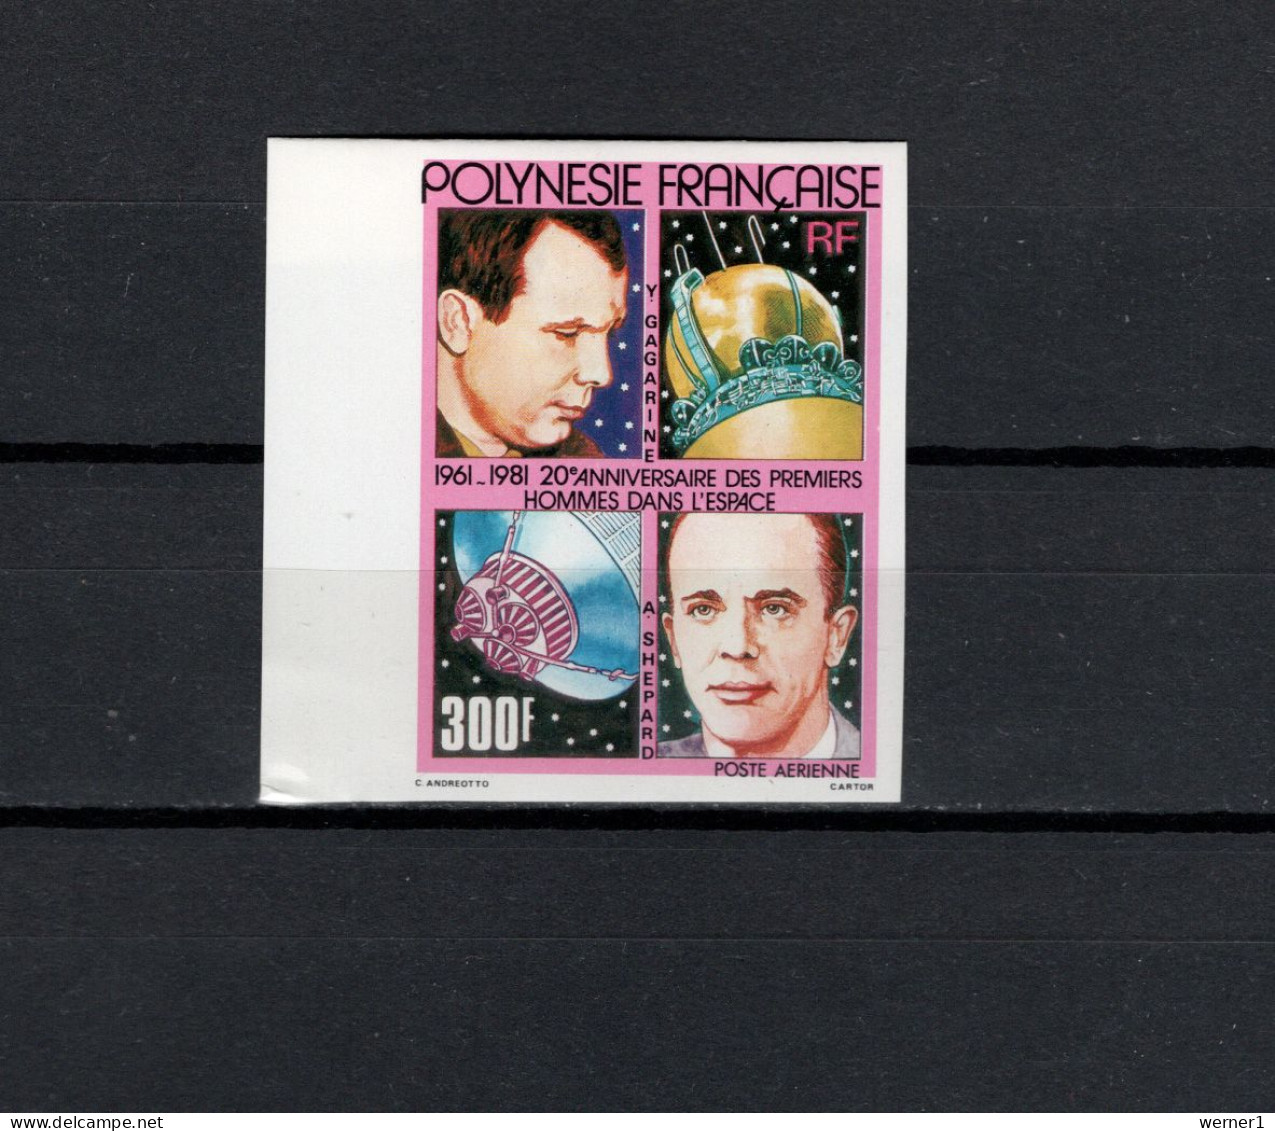 French Polynesia 1981 Space, 20th Anniversary Of Manned Spaceflight Stamp Imperf. MNH -scarce- - Oceania